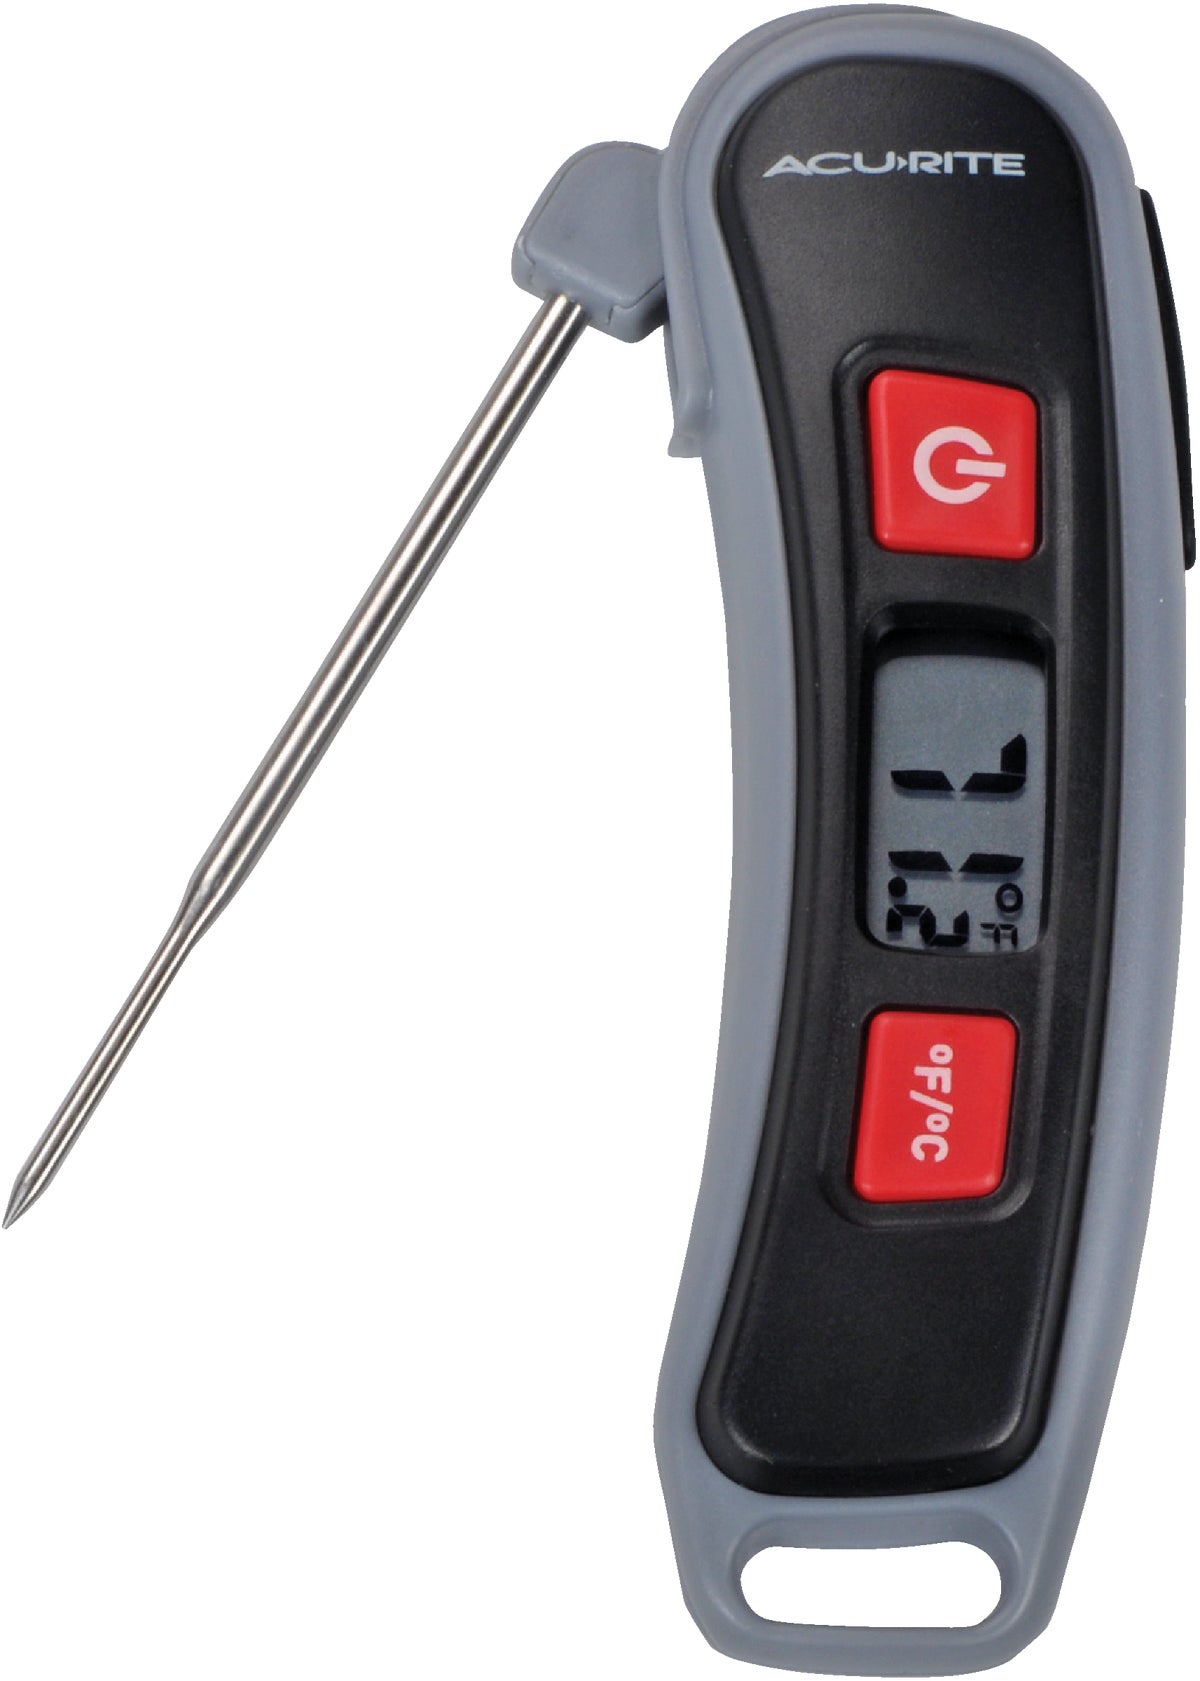 Buy Acu Rite Digital Instant Read Kitchen Thermometer